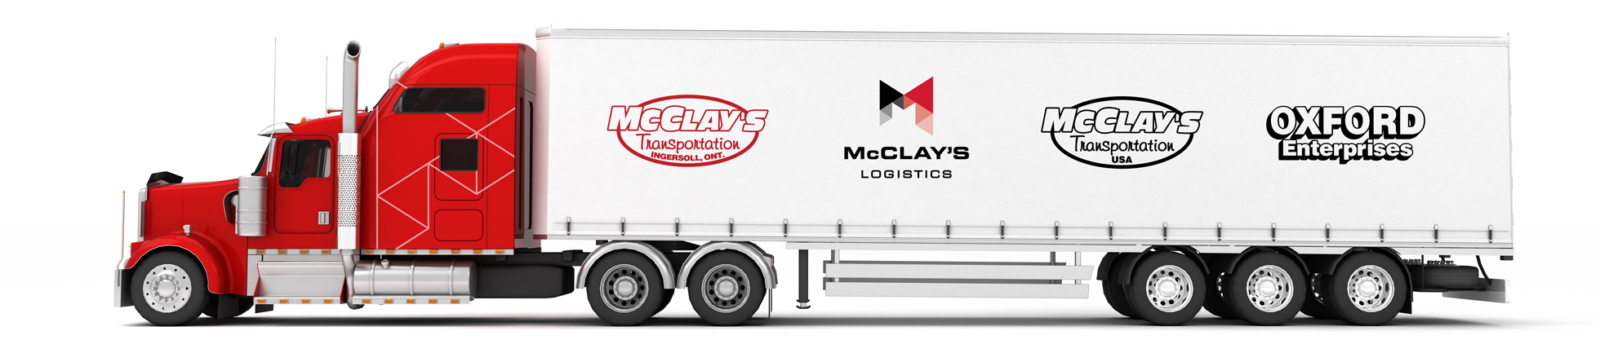 red semi truck illustration with McClay's logos on the trailer